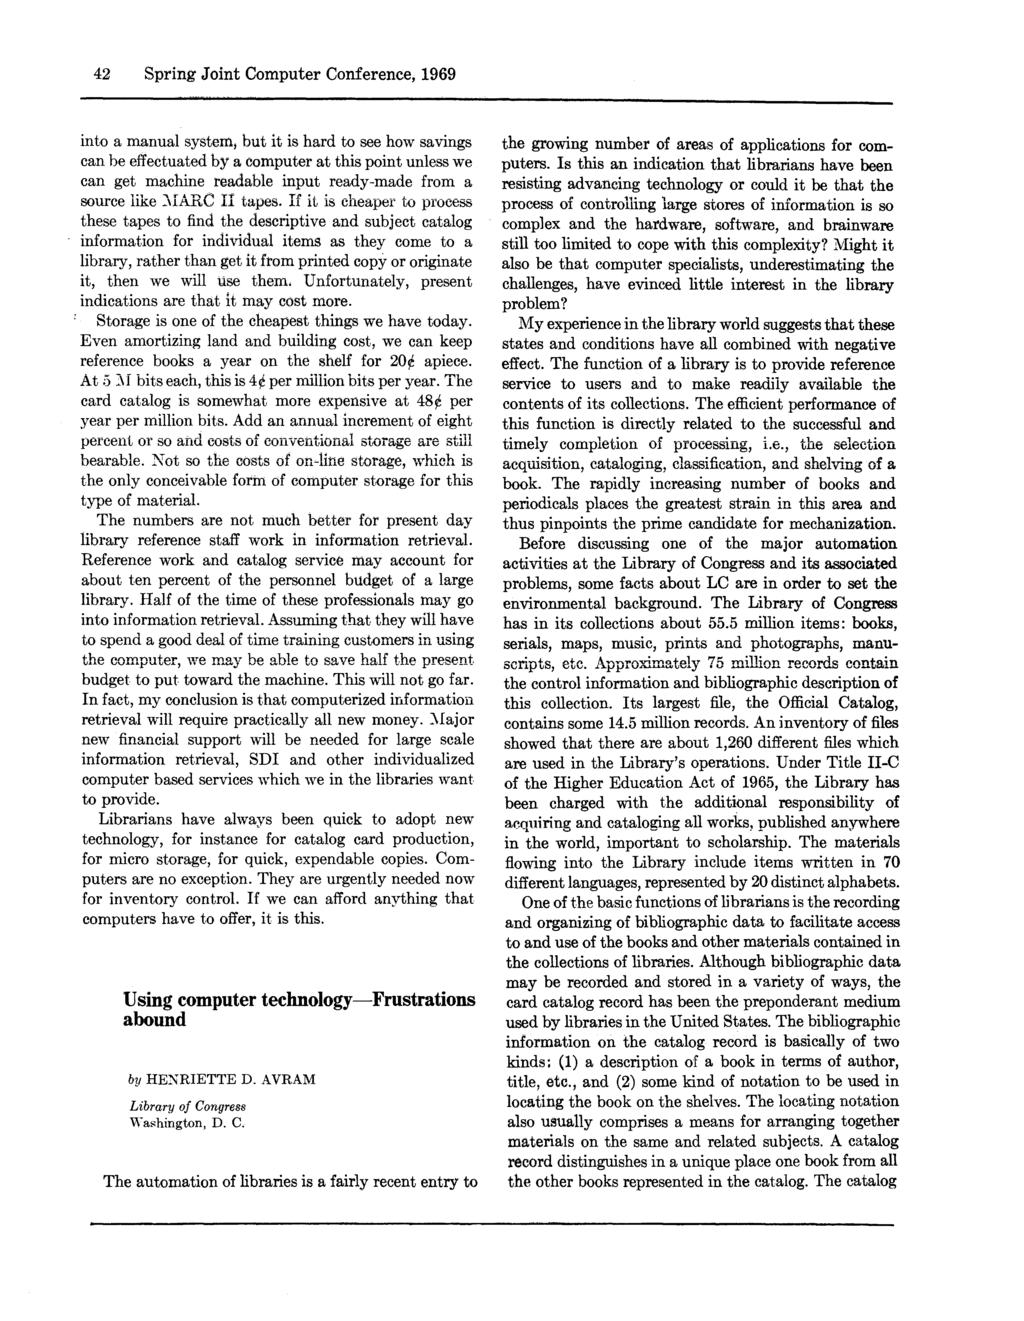 42 Spring Joint Computer Conference, 1969 into a manual system; but it is hard to see how savings can be effectuated by a computer at this point unless we can get machine readable input ready-made